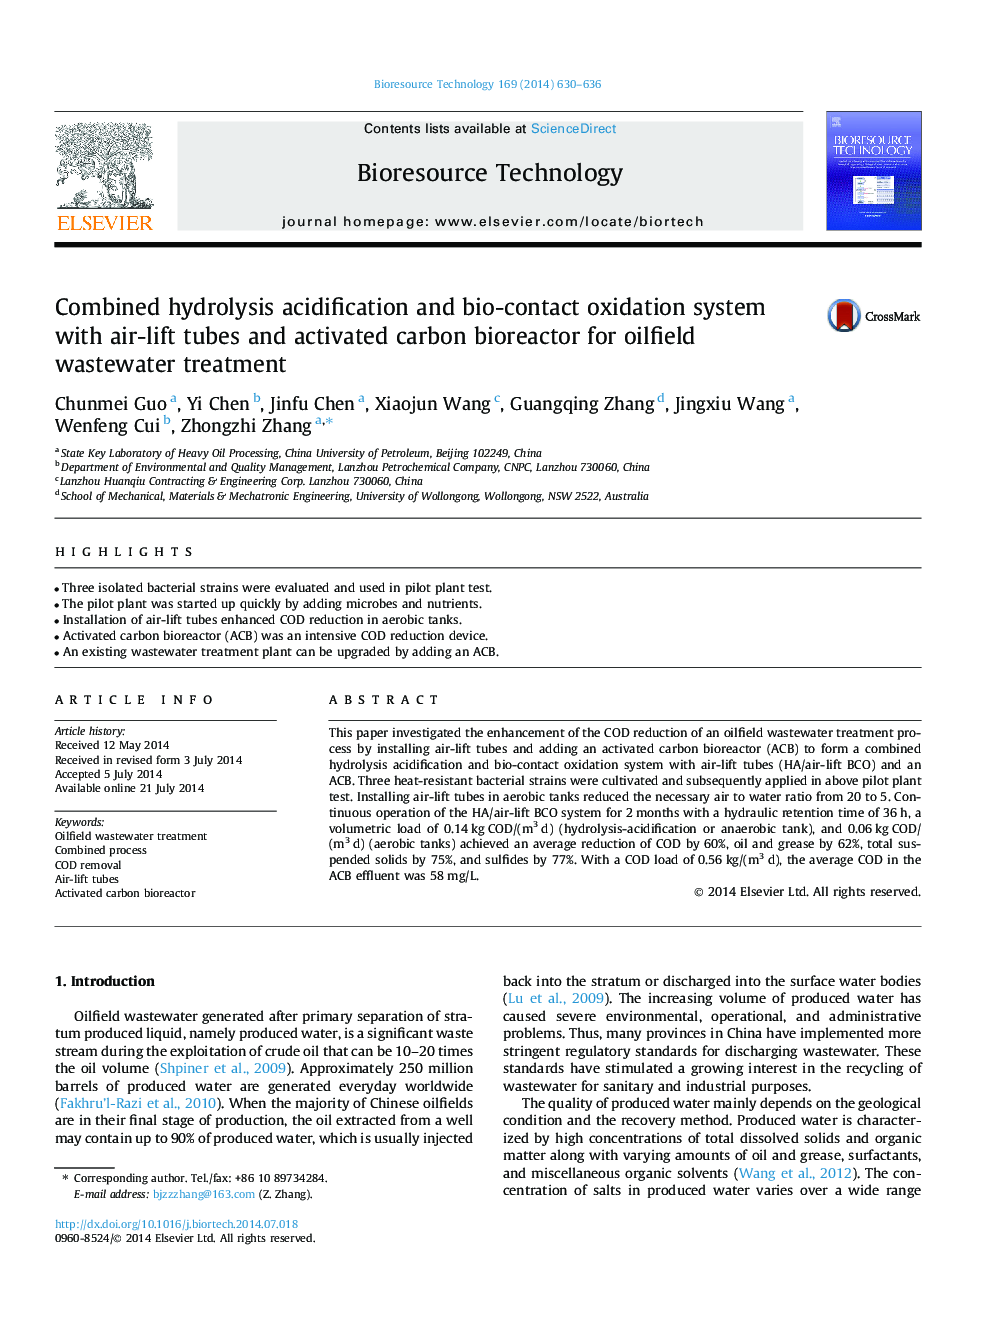 Combined hydrolysis acidification and bio-contact oxidation system with air-lift tubes and activated carbon bioreactor for oilfield wastewater treatment